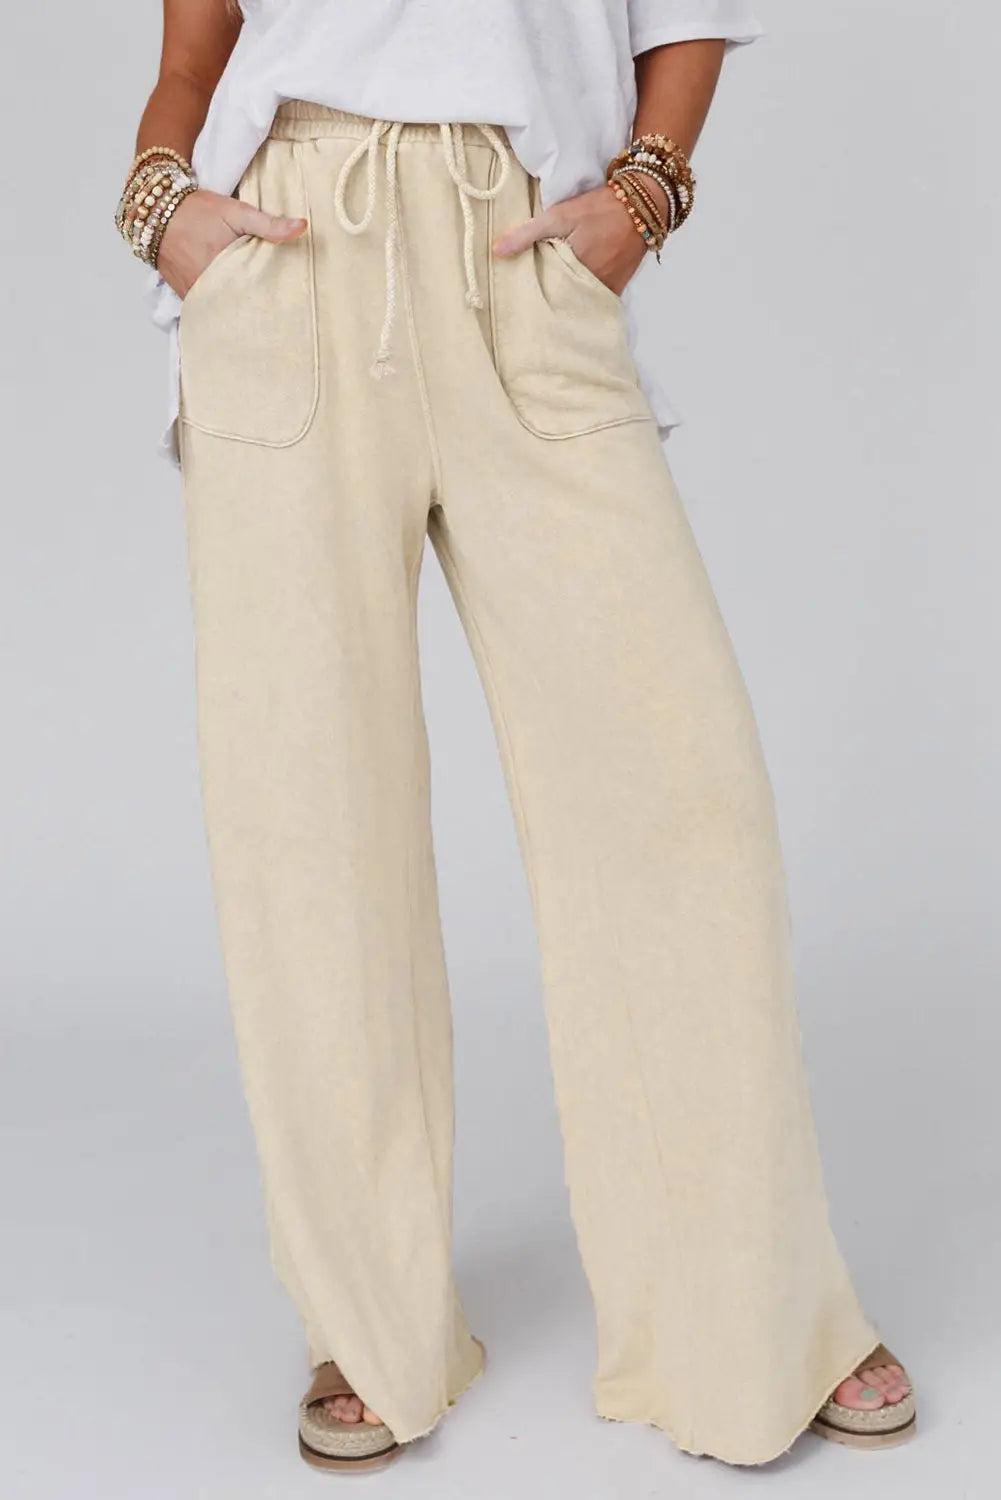 Gray mineral washed drawstring retro wide leg pants - apricot / s / 80% polyester + 20% cotton